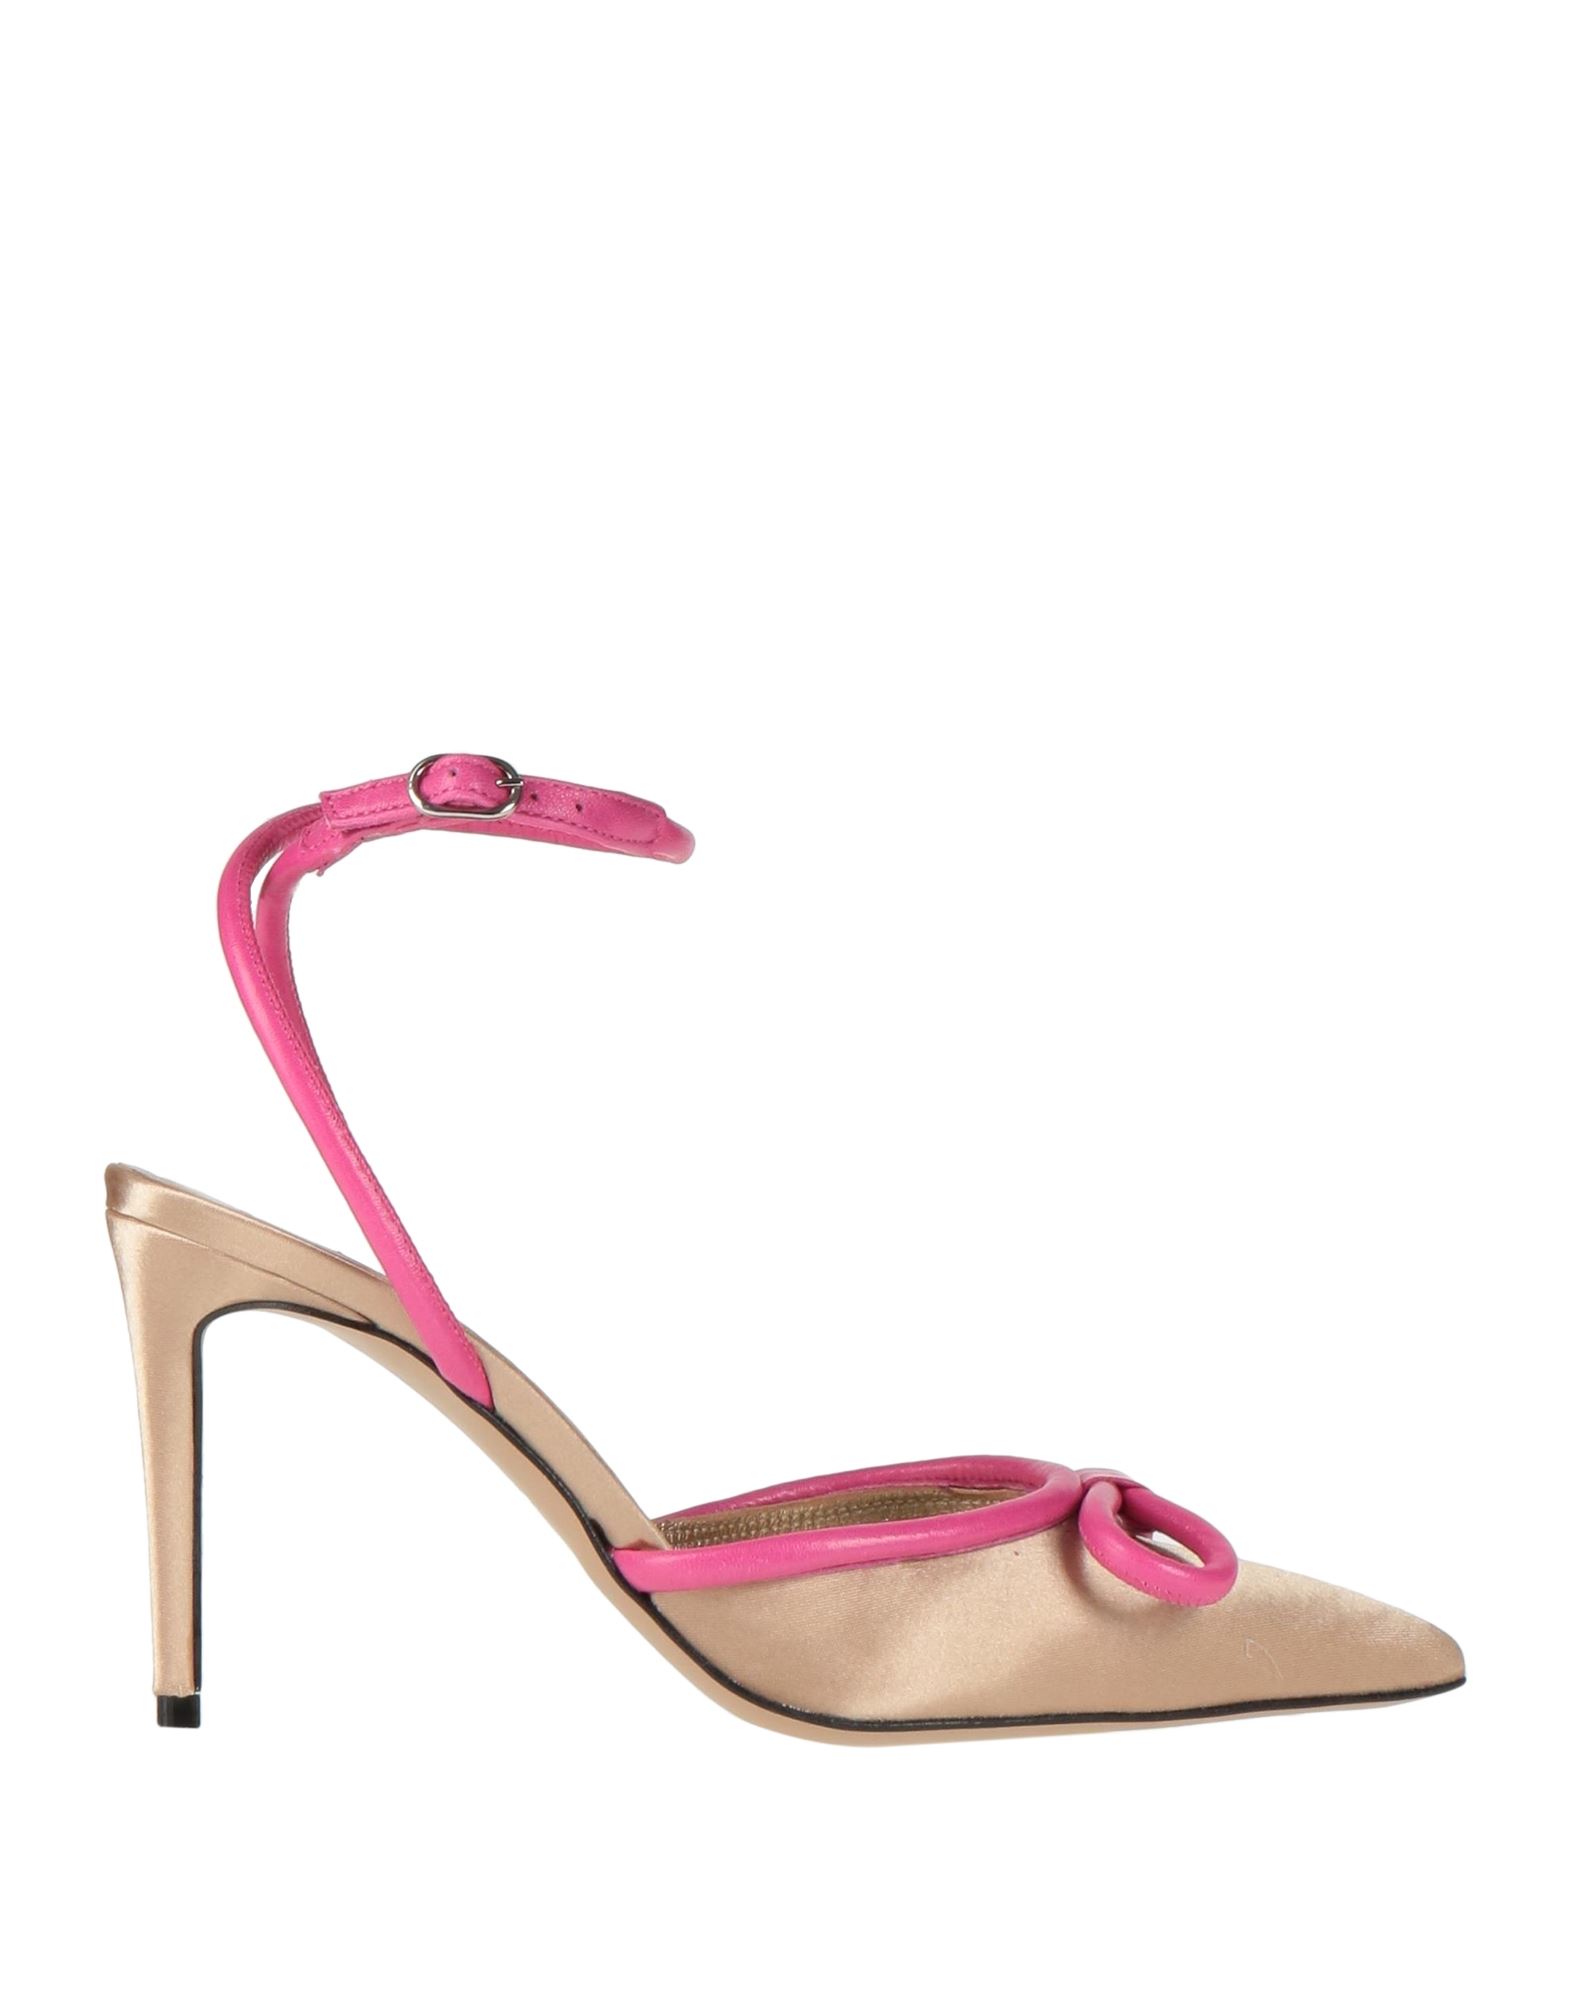 Ovye' By Cristina Lucchi Pumps In Beige